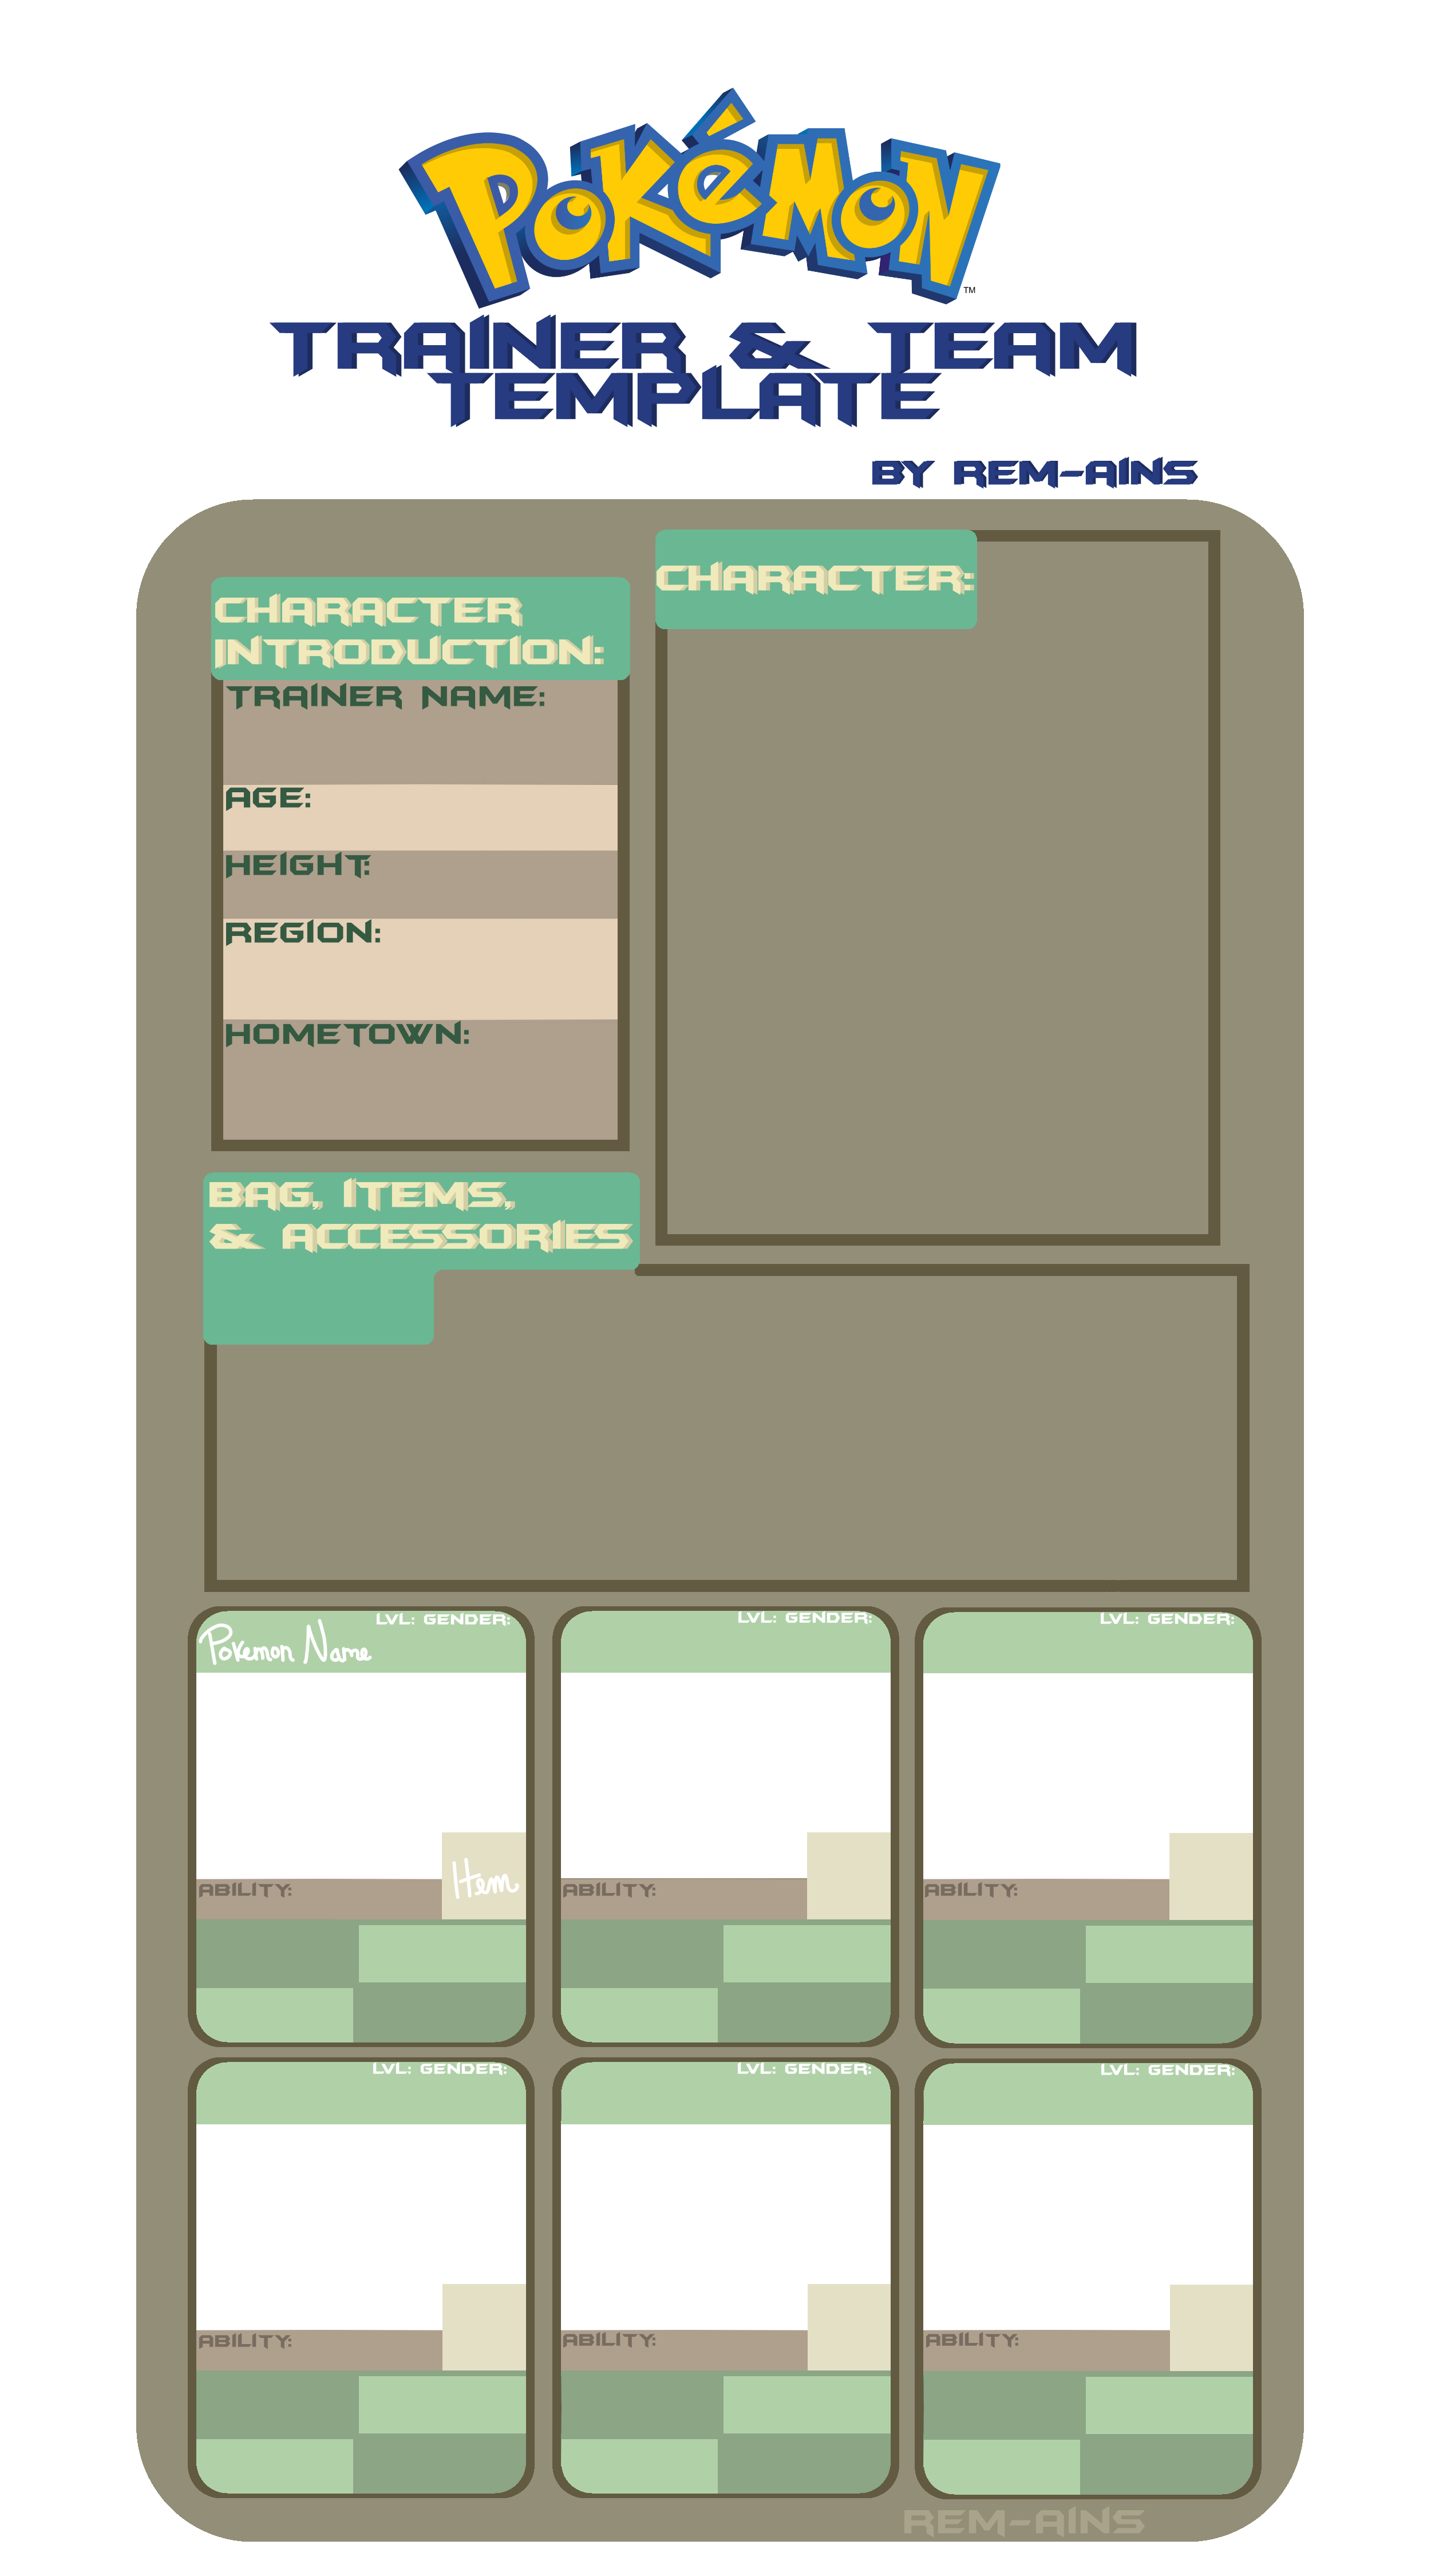 Pokemon Trainer and Team Template by remains on DeviantArt